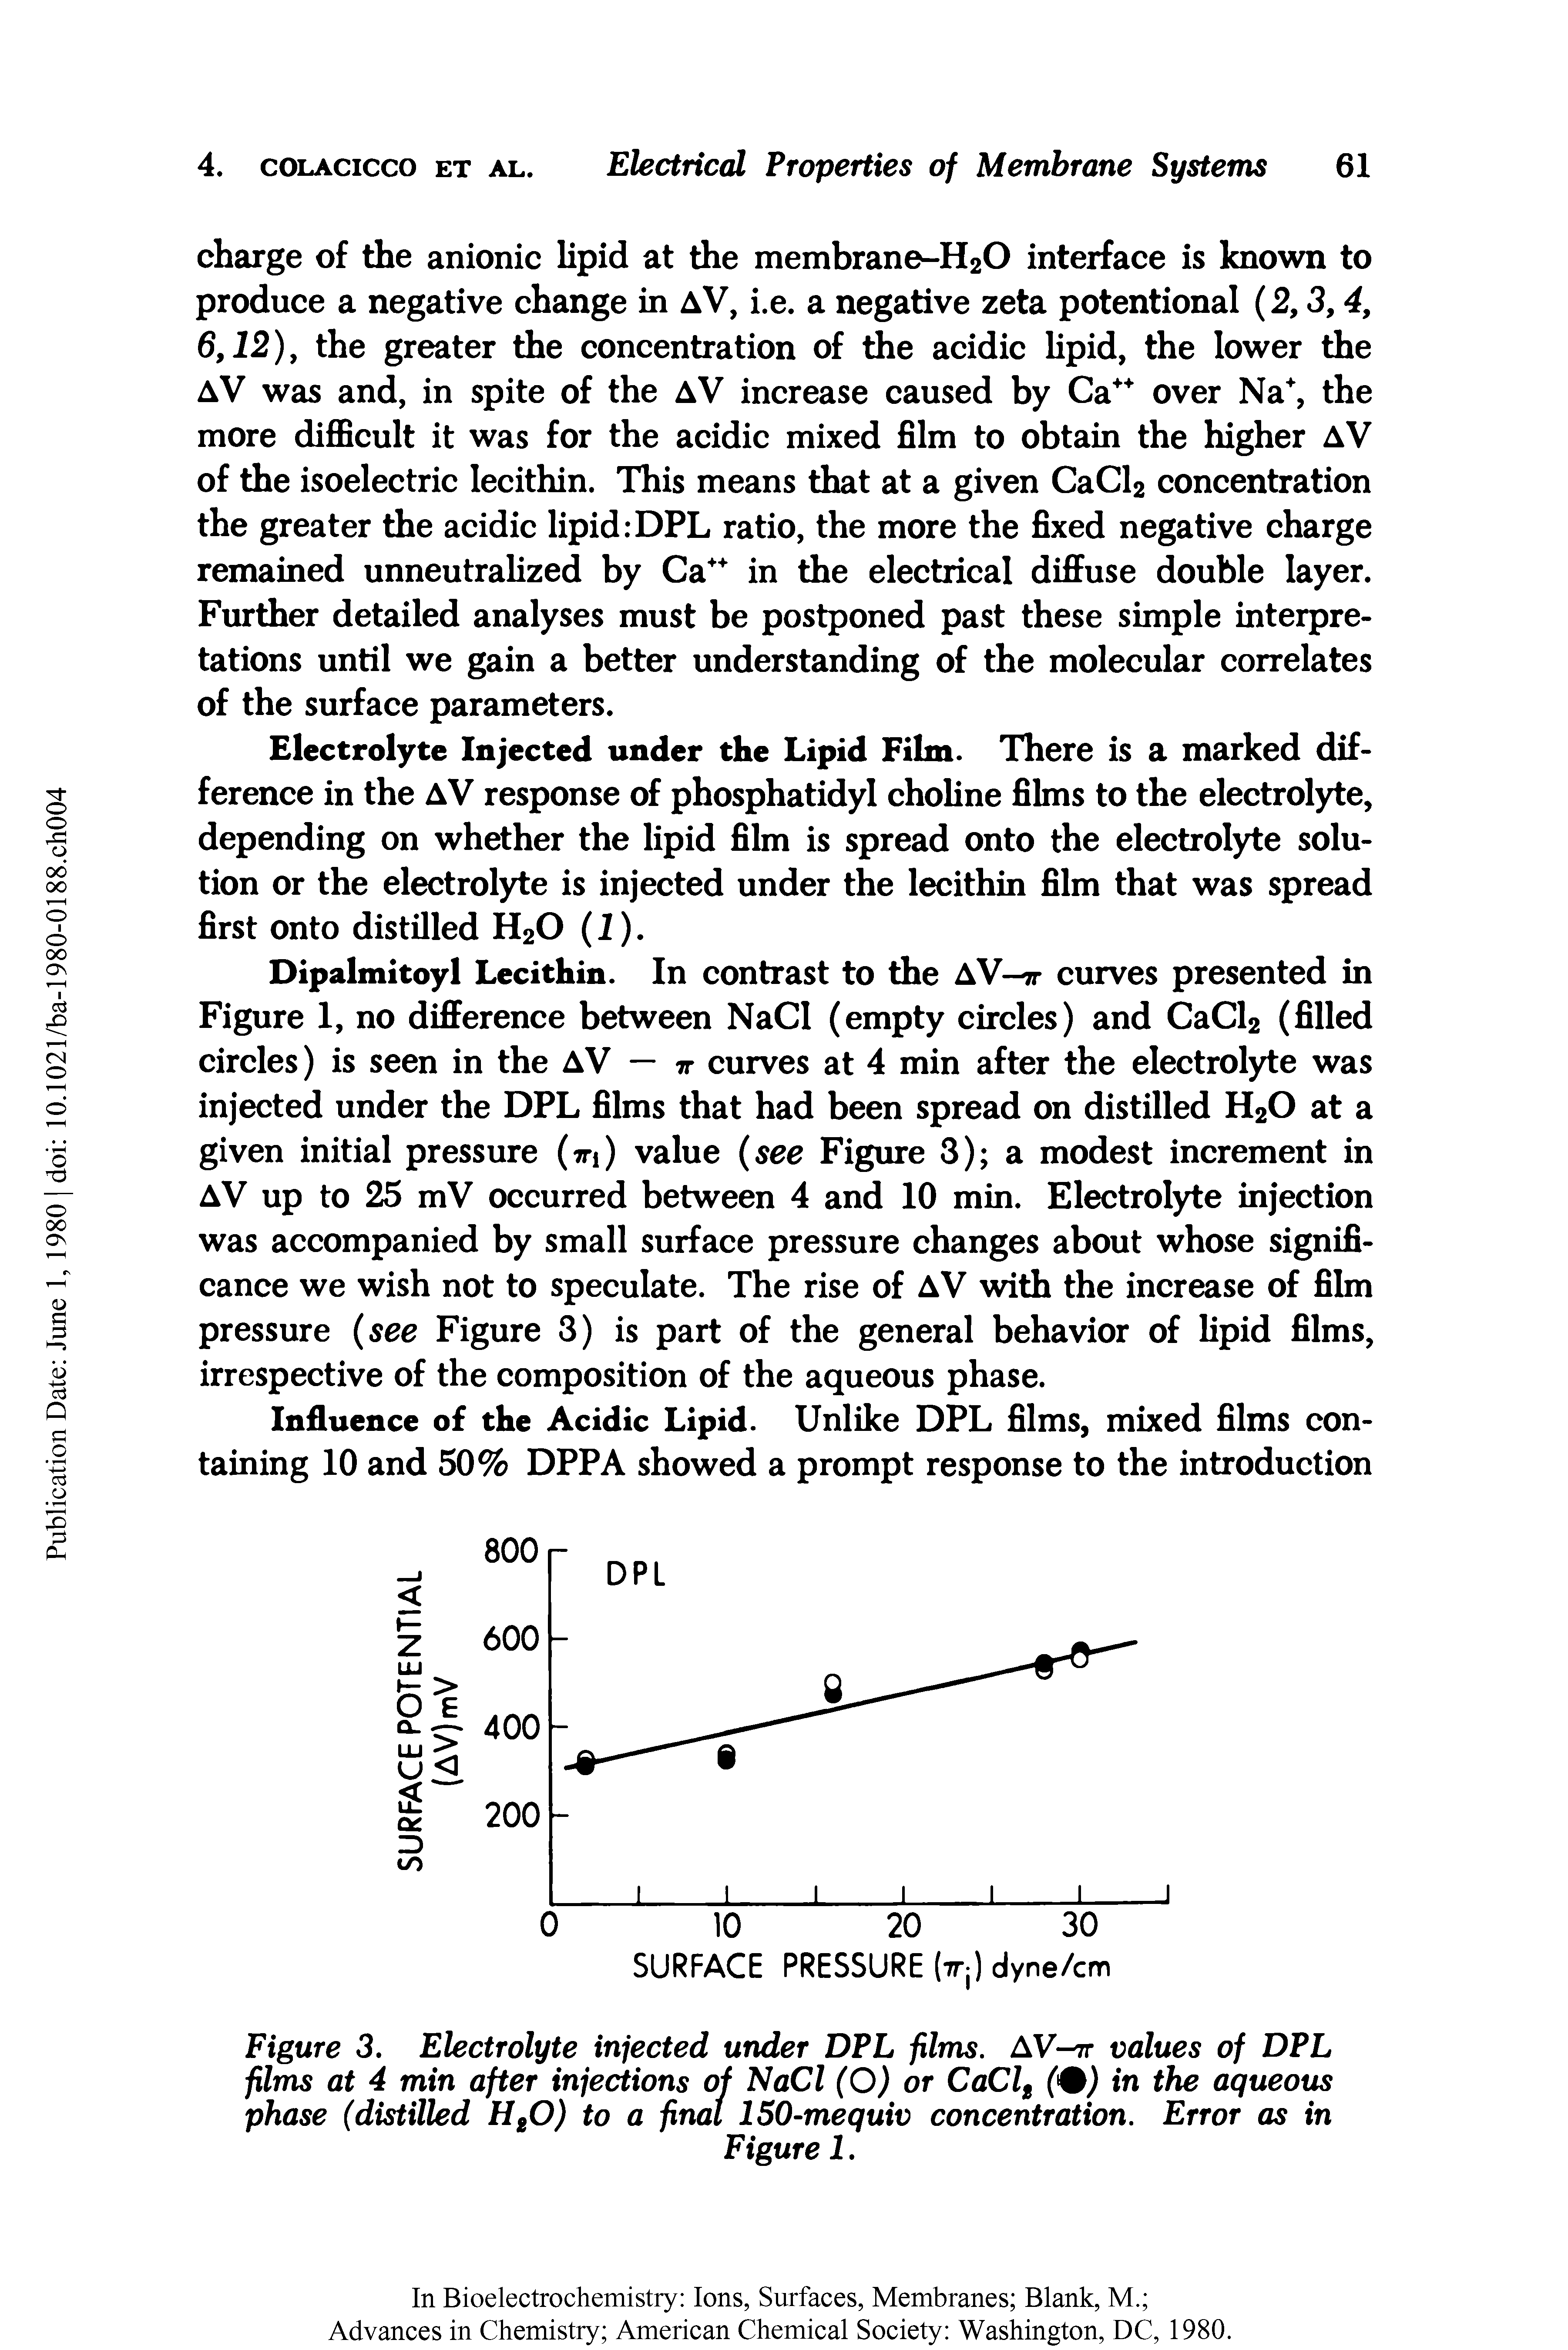 Figure 3. Electrolyte injected under DPL films. AV-7T values of DPL films at 4 min after injections of NaCl (O) or CaCl ( ) in the aqueous phase (distilled HbO) to a final 150-mequiv concentration. Error as in...